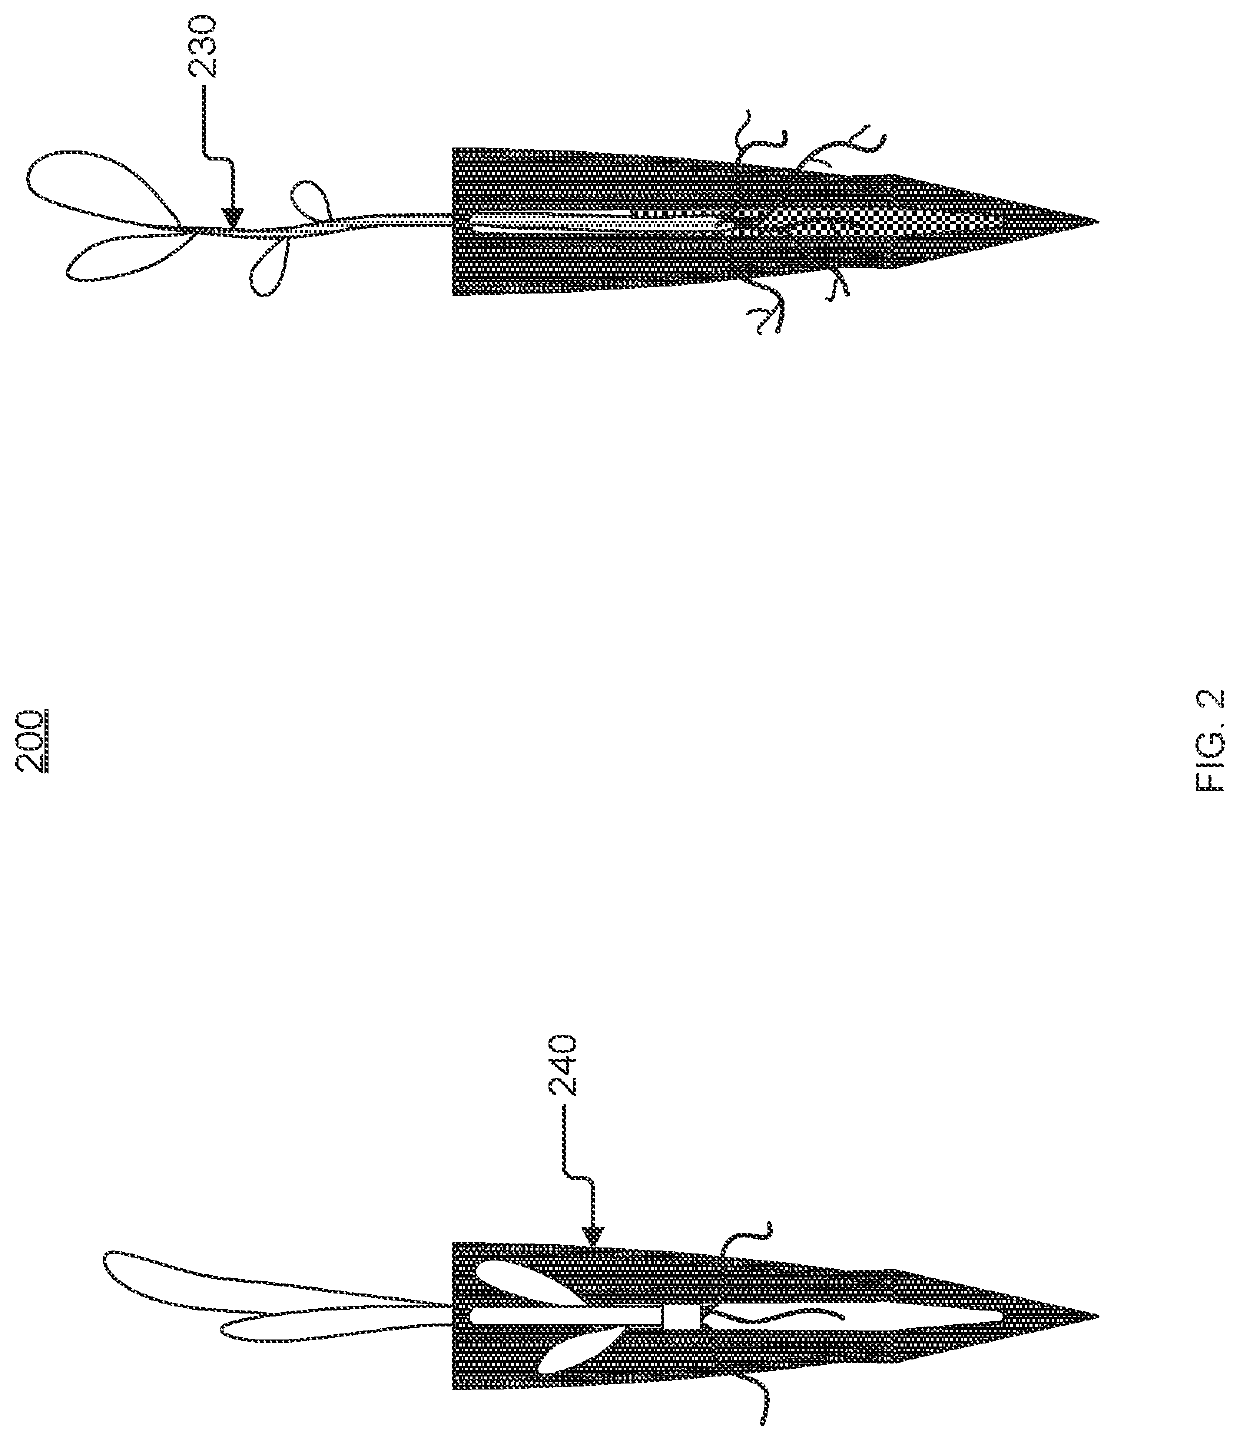 Systems and Methods for Planting Flora and Fauna Through Drone Delivery